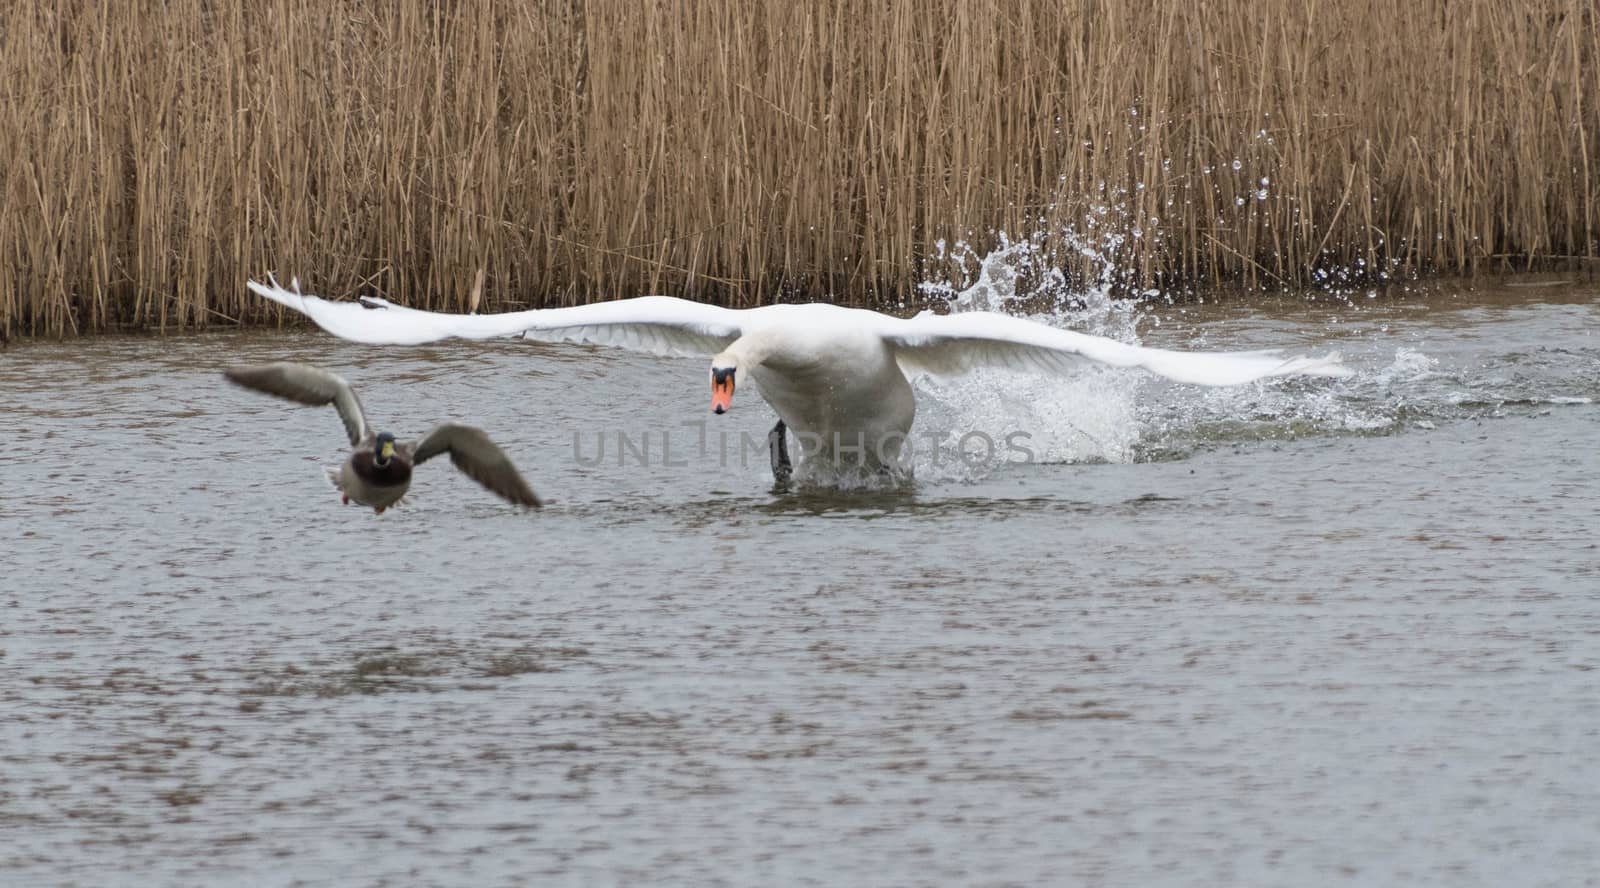 A male swan clearing his lake during nesting season